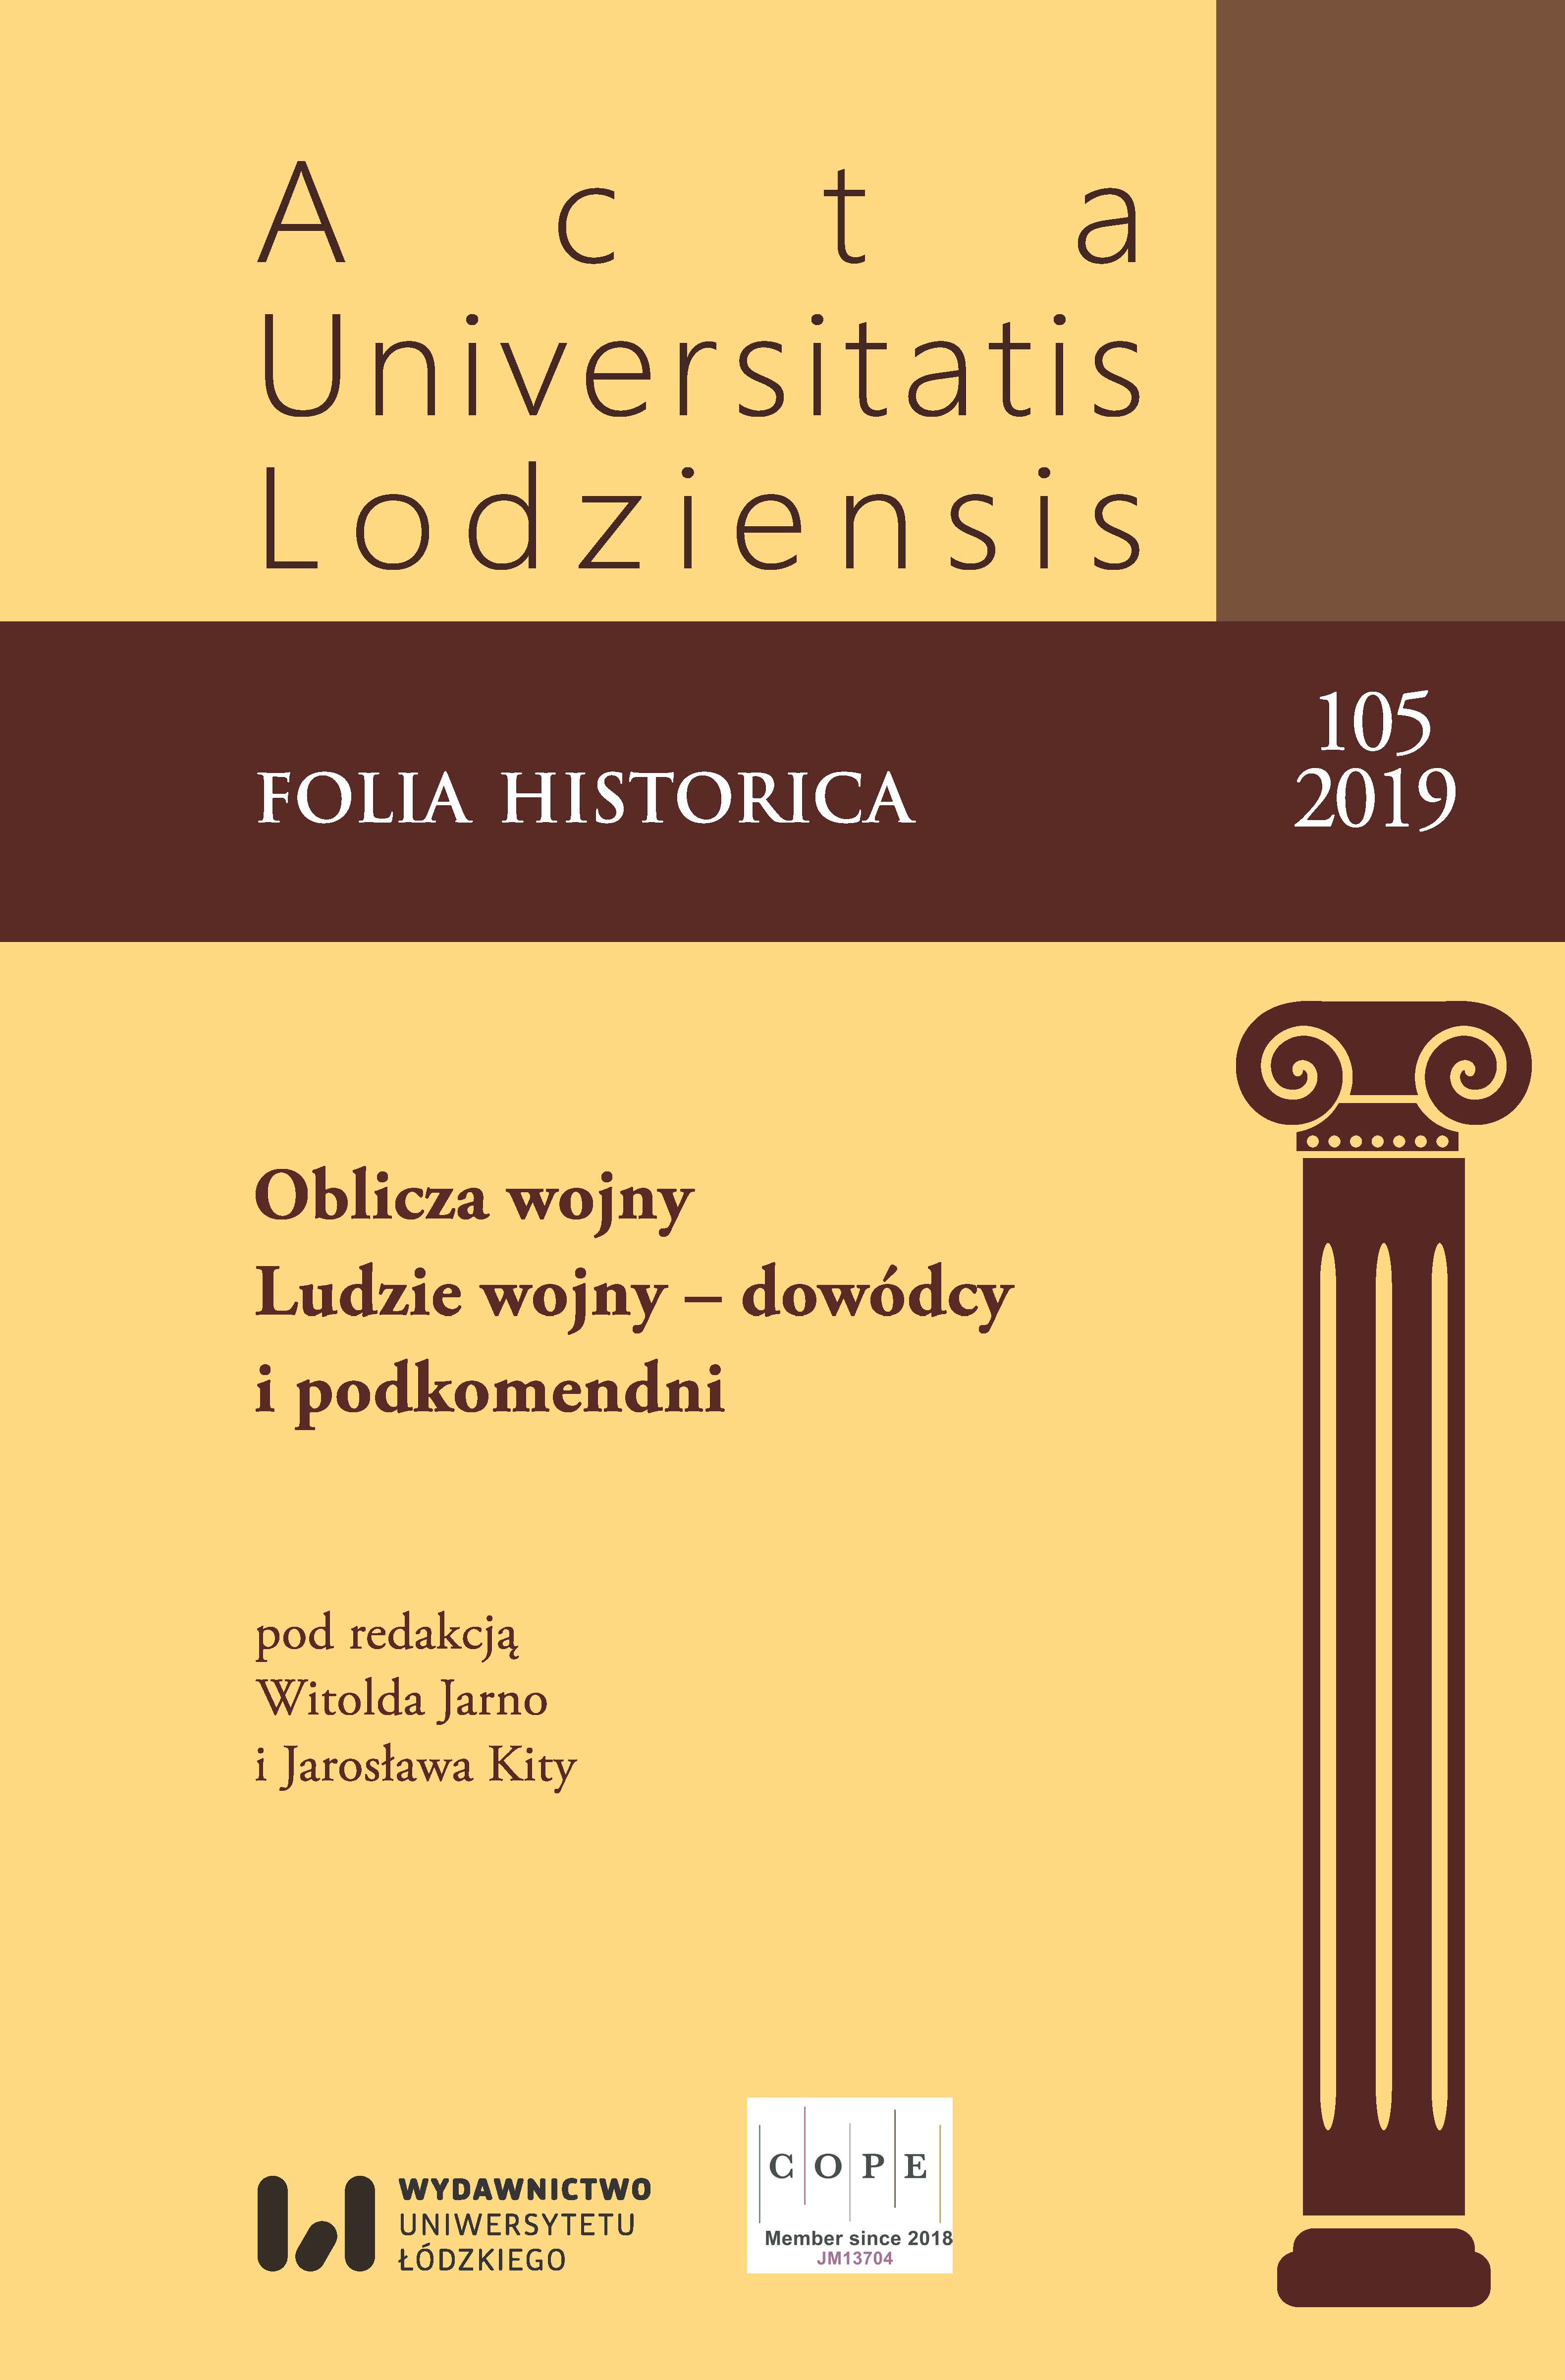 Restoring and preserving the memory in Polish society about soldiers of border groups of the Second Polish Republic who died in defensive battles with German and Soviet troops in September 1939 Cover Image